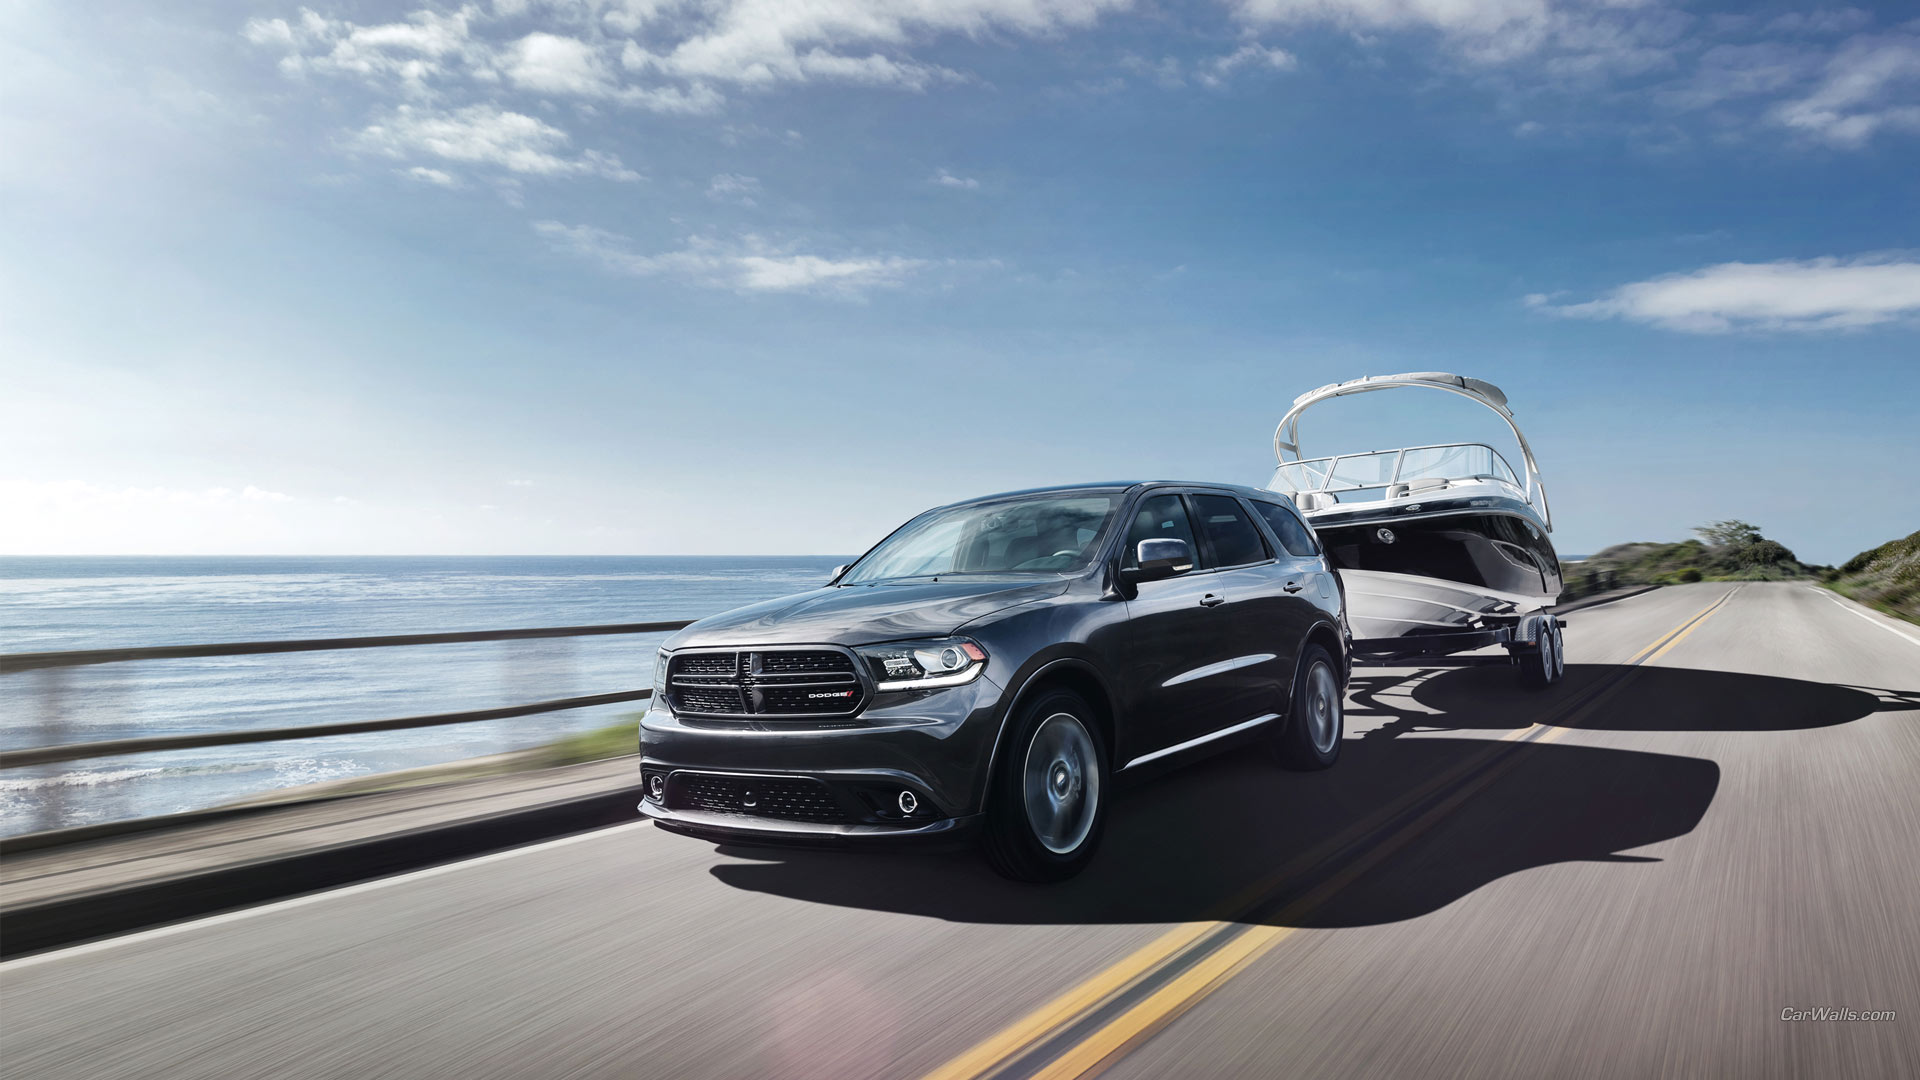 2021 Dodge Durango RT  Wallpapers and HD Images  Car Pixel